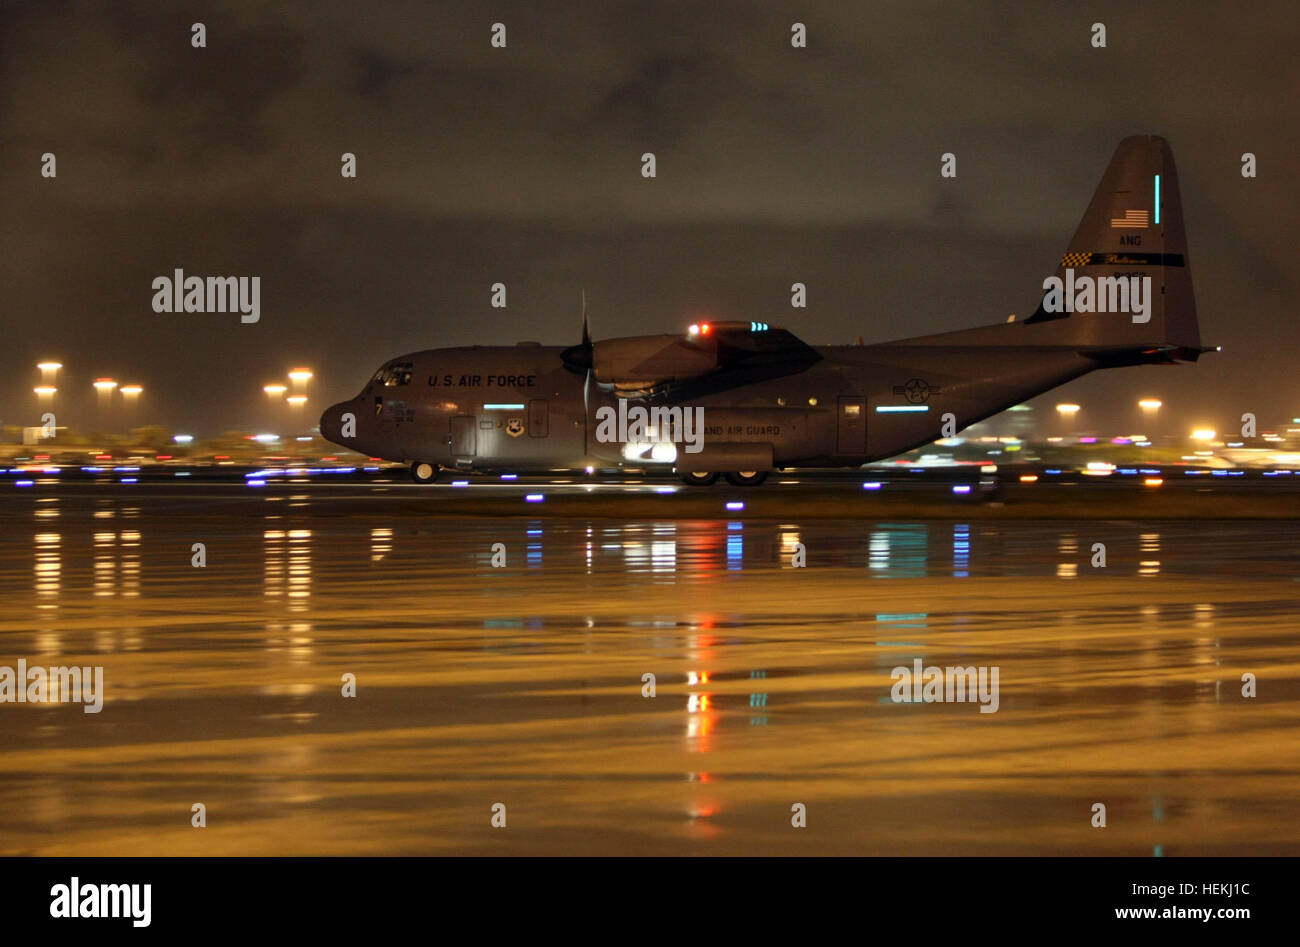 Florida, USA. 22nd Dec, 2016.  A U.S. Air Force transport plane arrives from Port-Au-Prince, Haiti at Palm Beach International Airport Monday night. Seventeen critically injured Haitians were brought to Palm Beach County for medical treatment. SCR 2598 © Allen Eyestone/The Palm Beach Post/ZUMA Wire/Alamy Live News Stock Photo